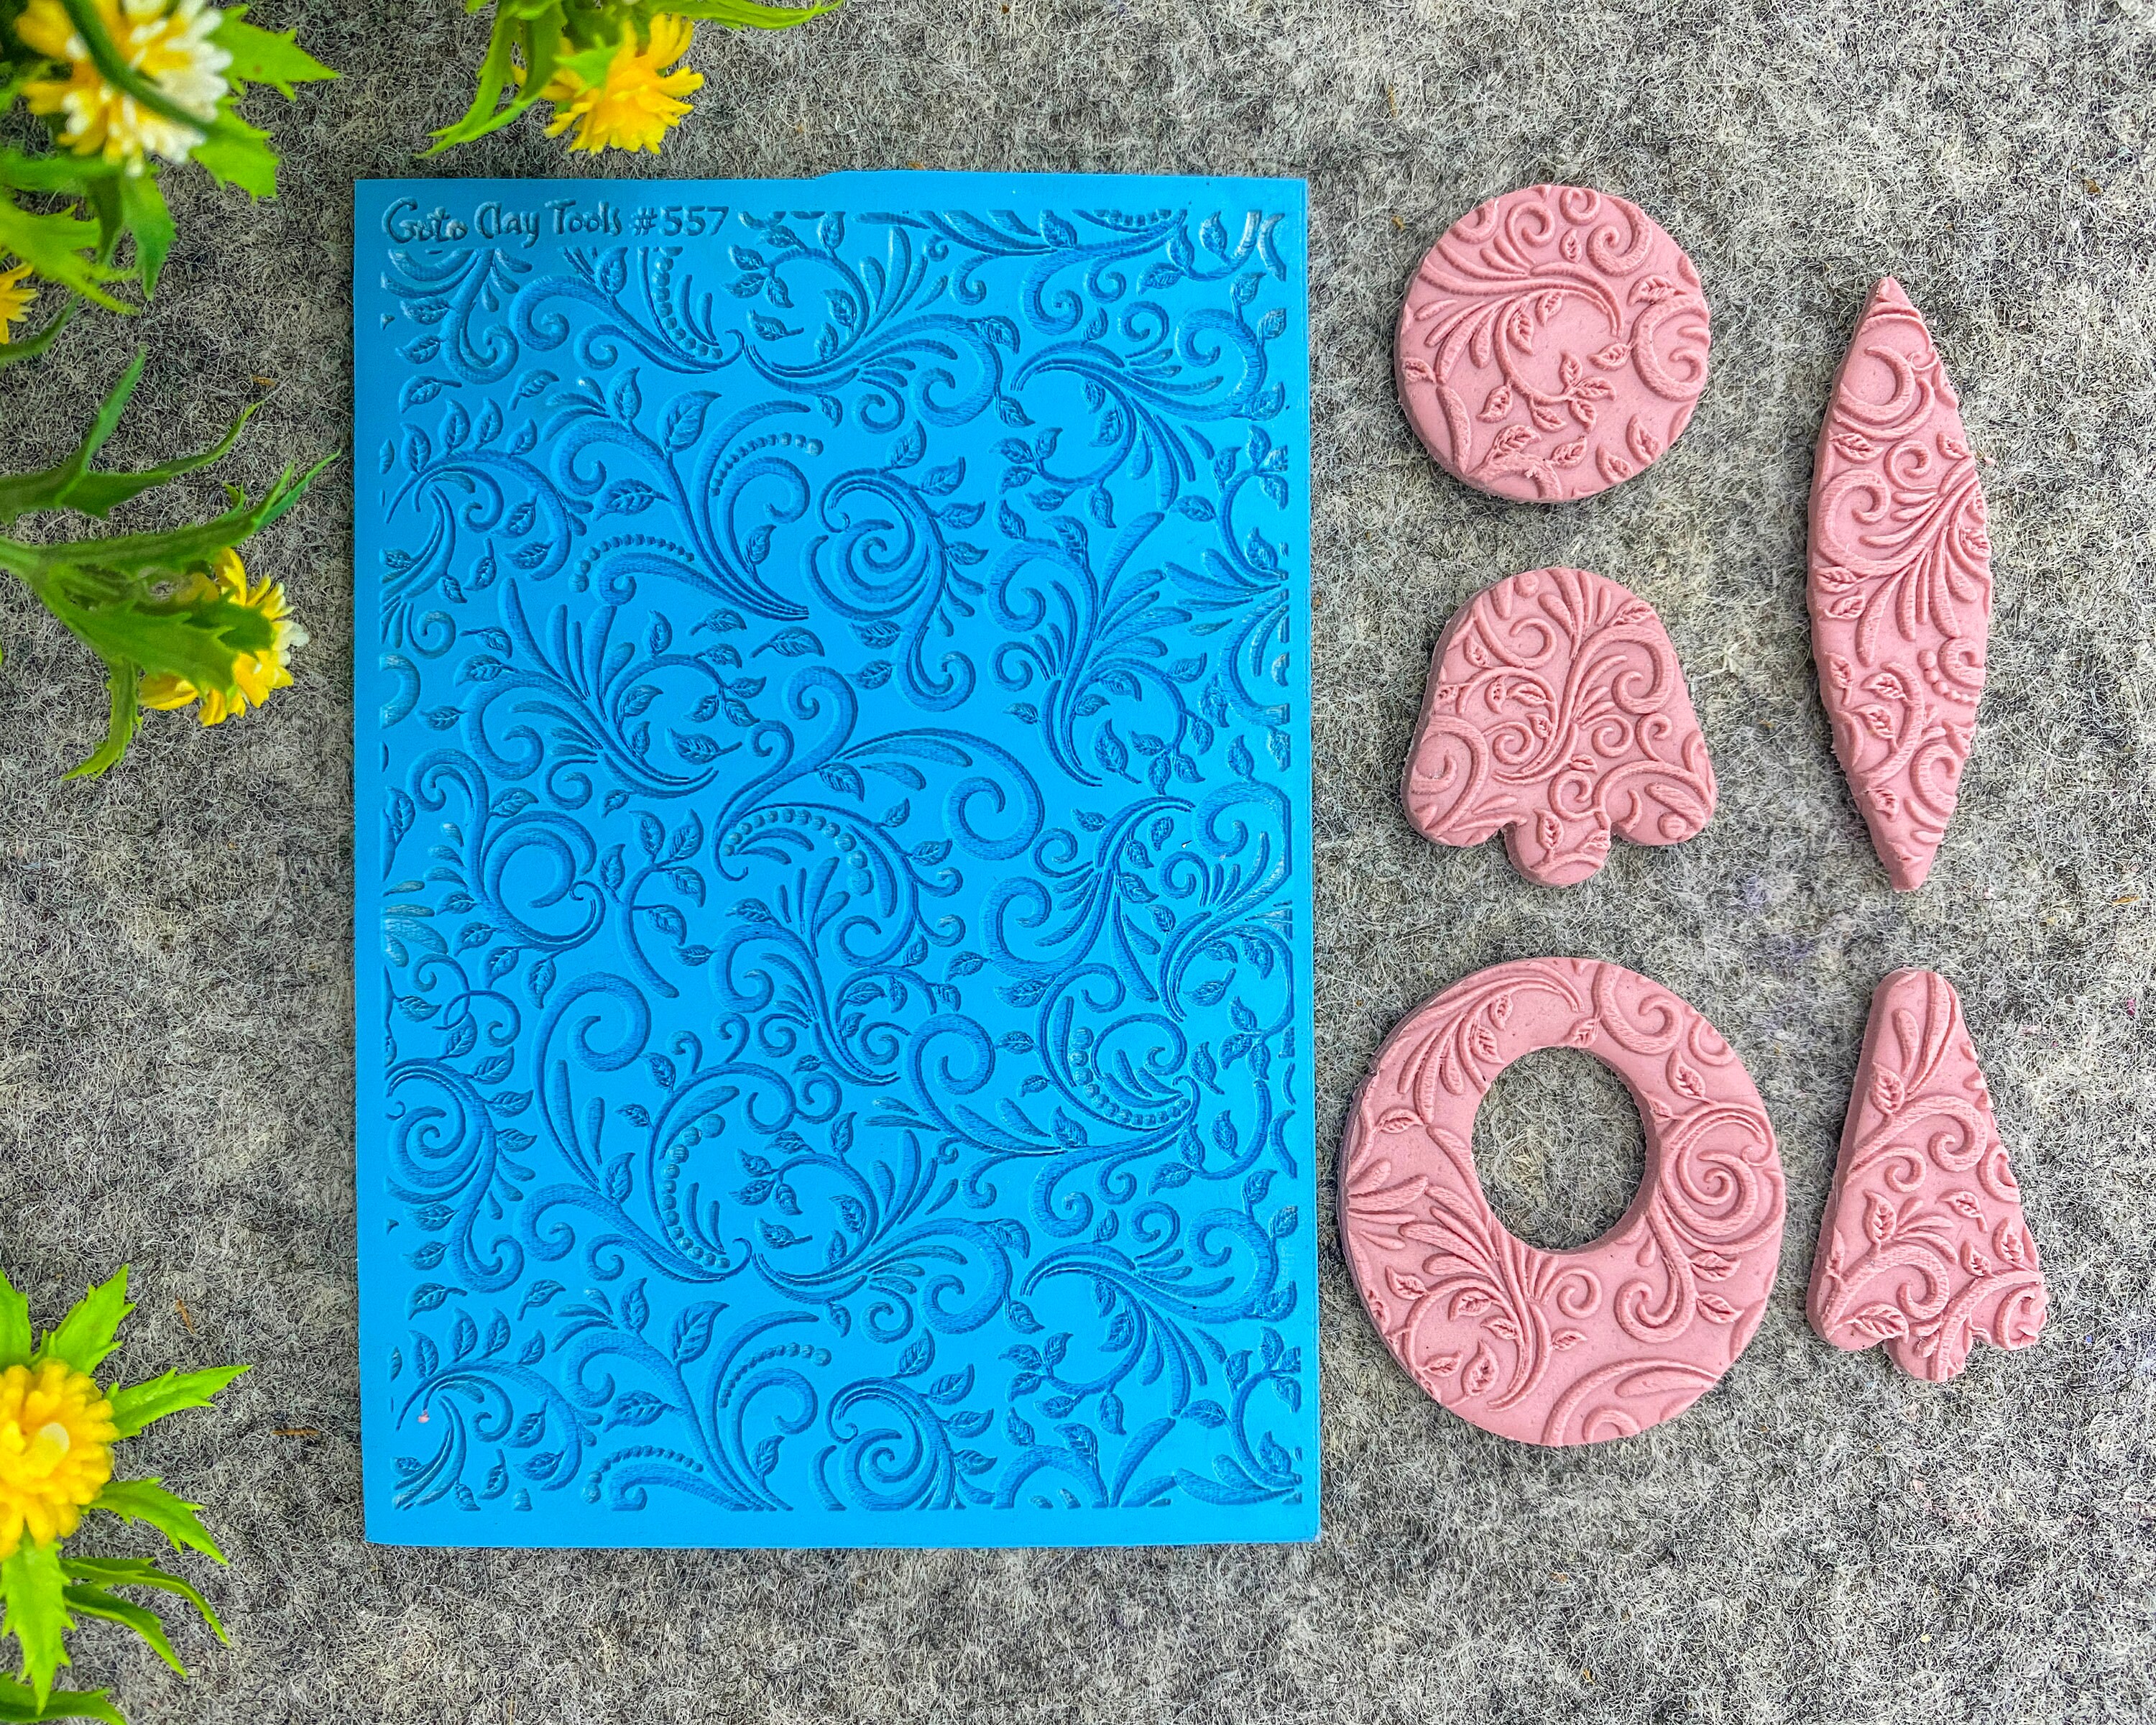 Puocaon Clay Texture Molds for Earrings, 2 Pcs Embossed Flower Polymer Clay  Tools, Hard Acrylic Texture Sheet for Polymer Clay Jewelry Making